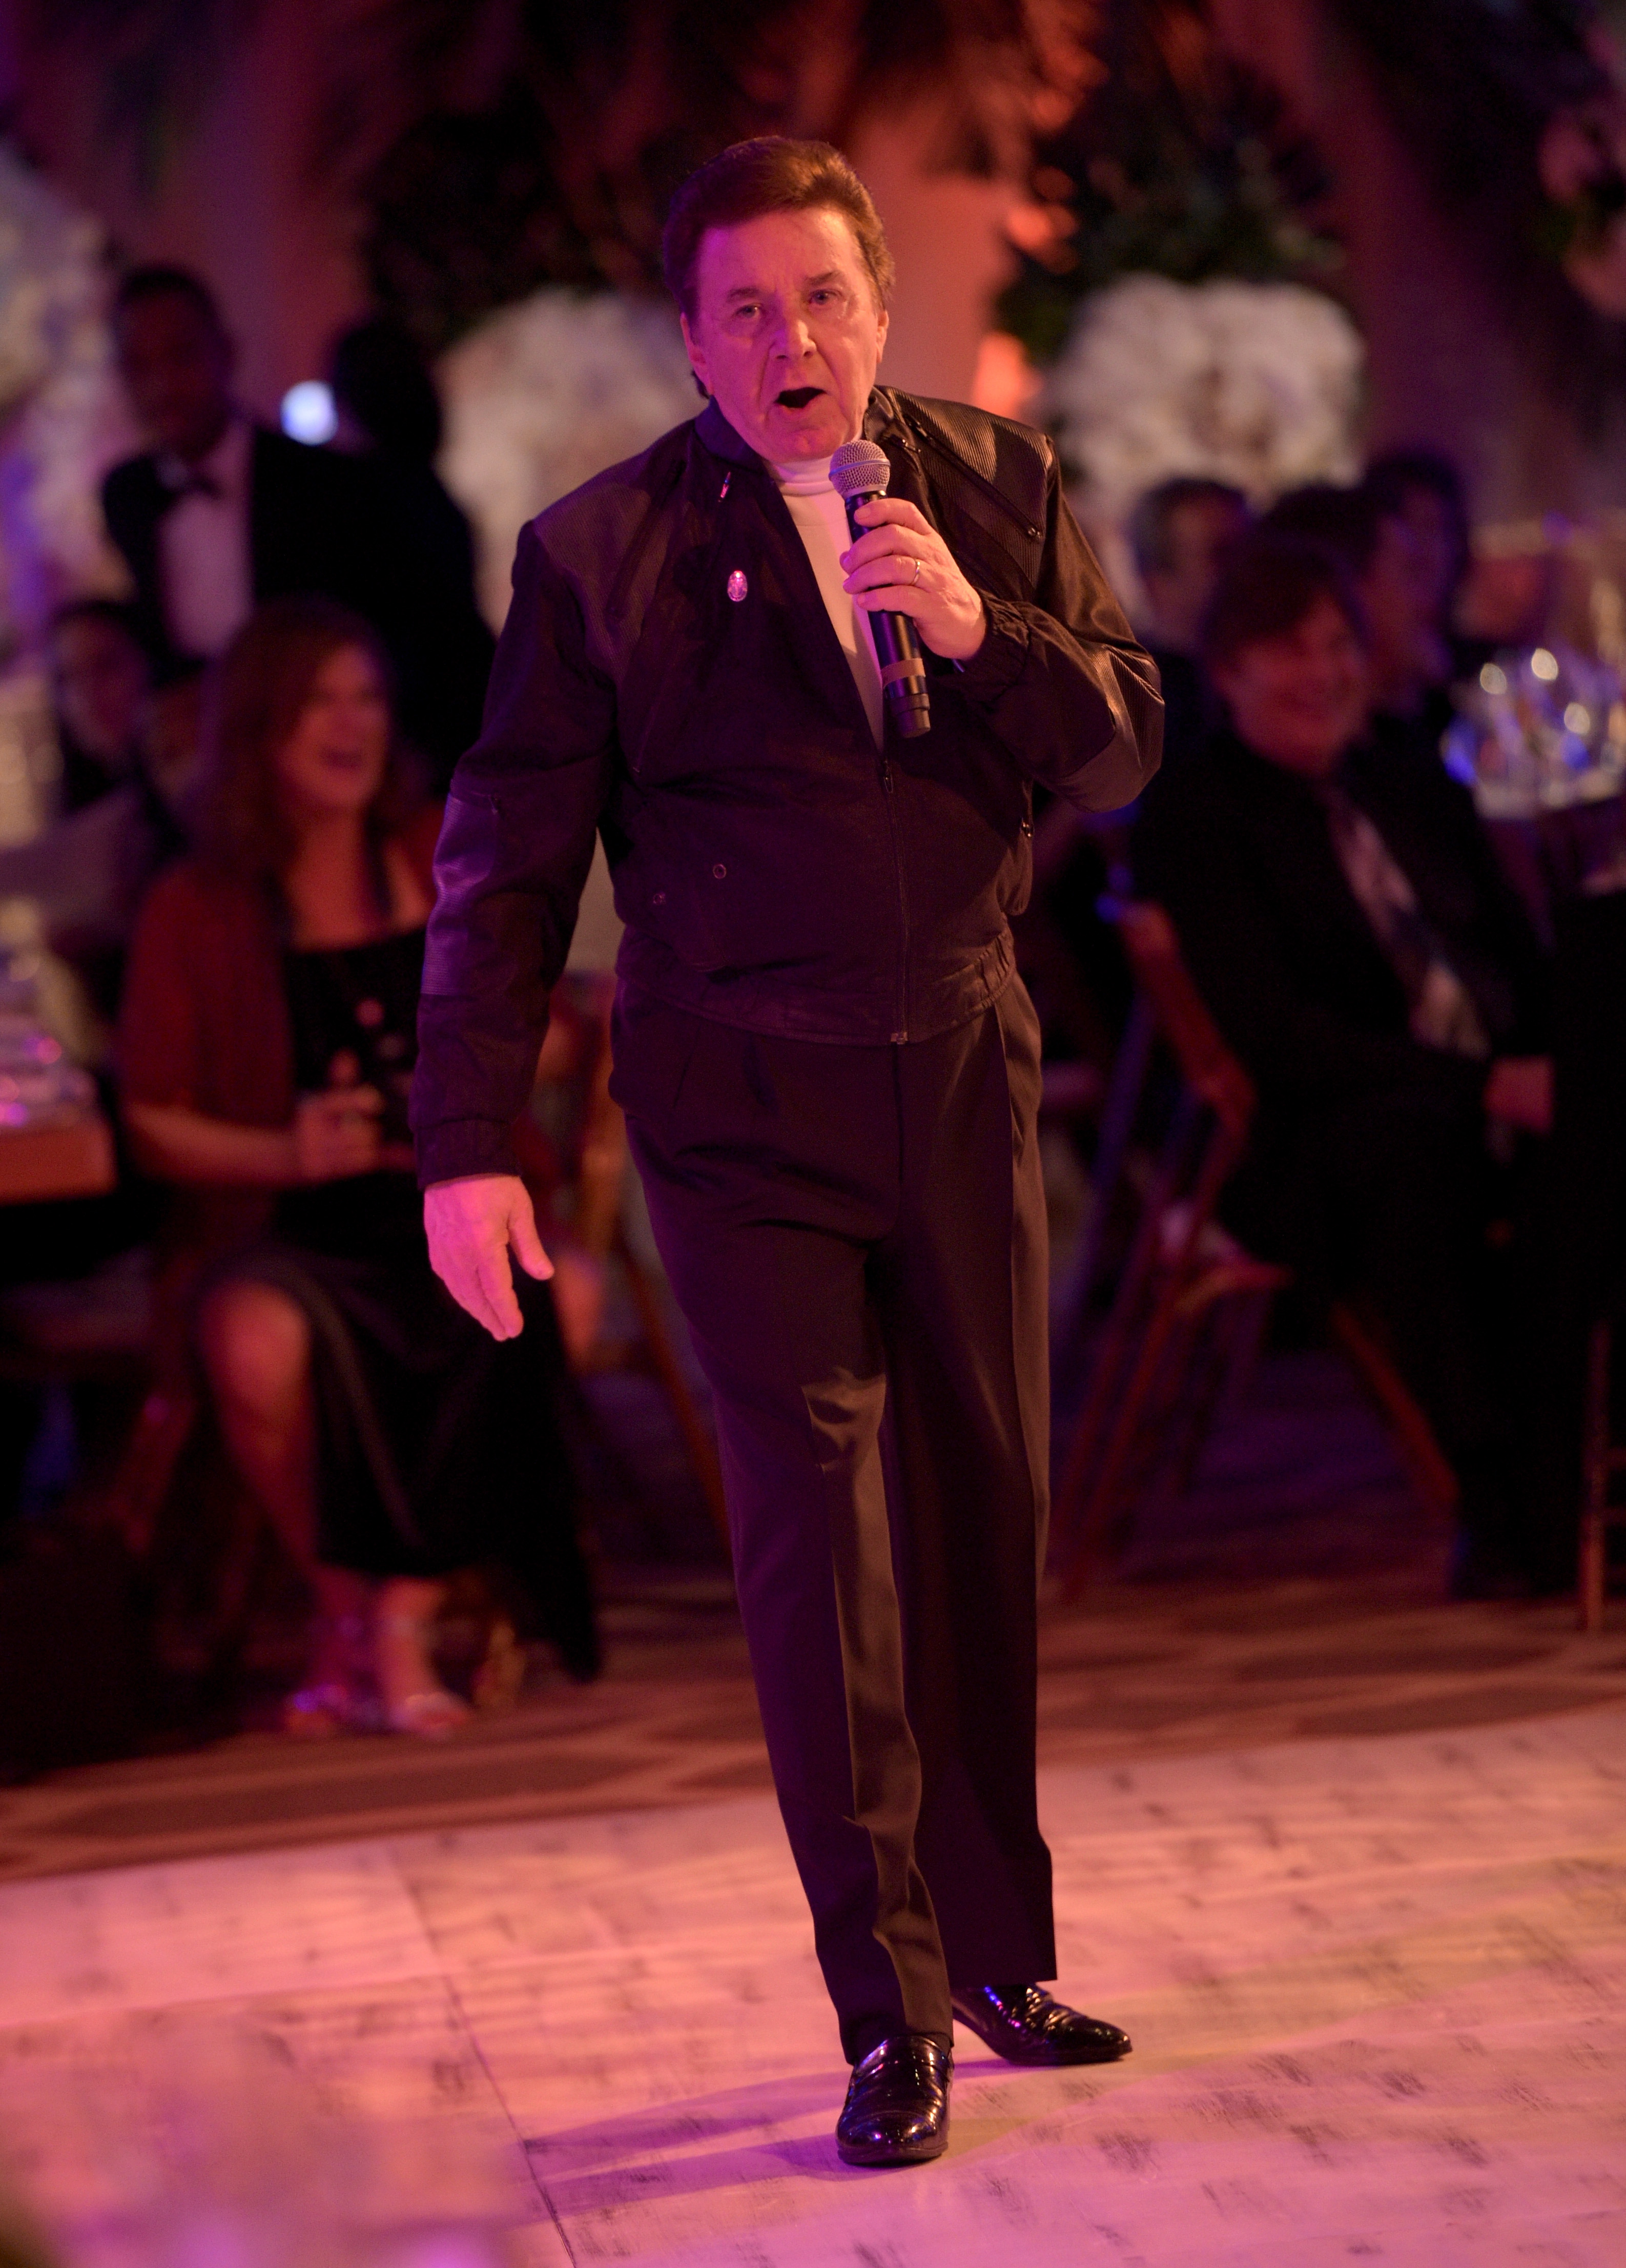 Bobby Sherman performs during the Brigitte and Bobby Sherman Children's Foundation's 6th Annual Christmas Gala and Fundraiser on December 19, 2015, in Beverly Hills, California | Source: Getty Images